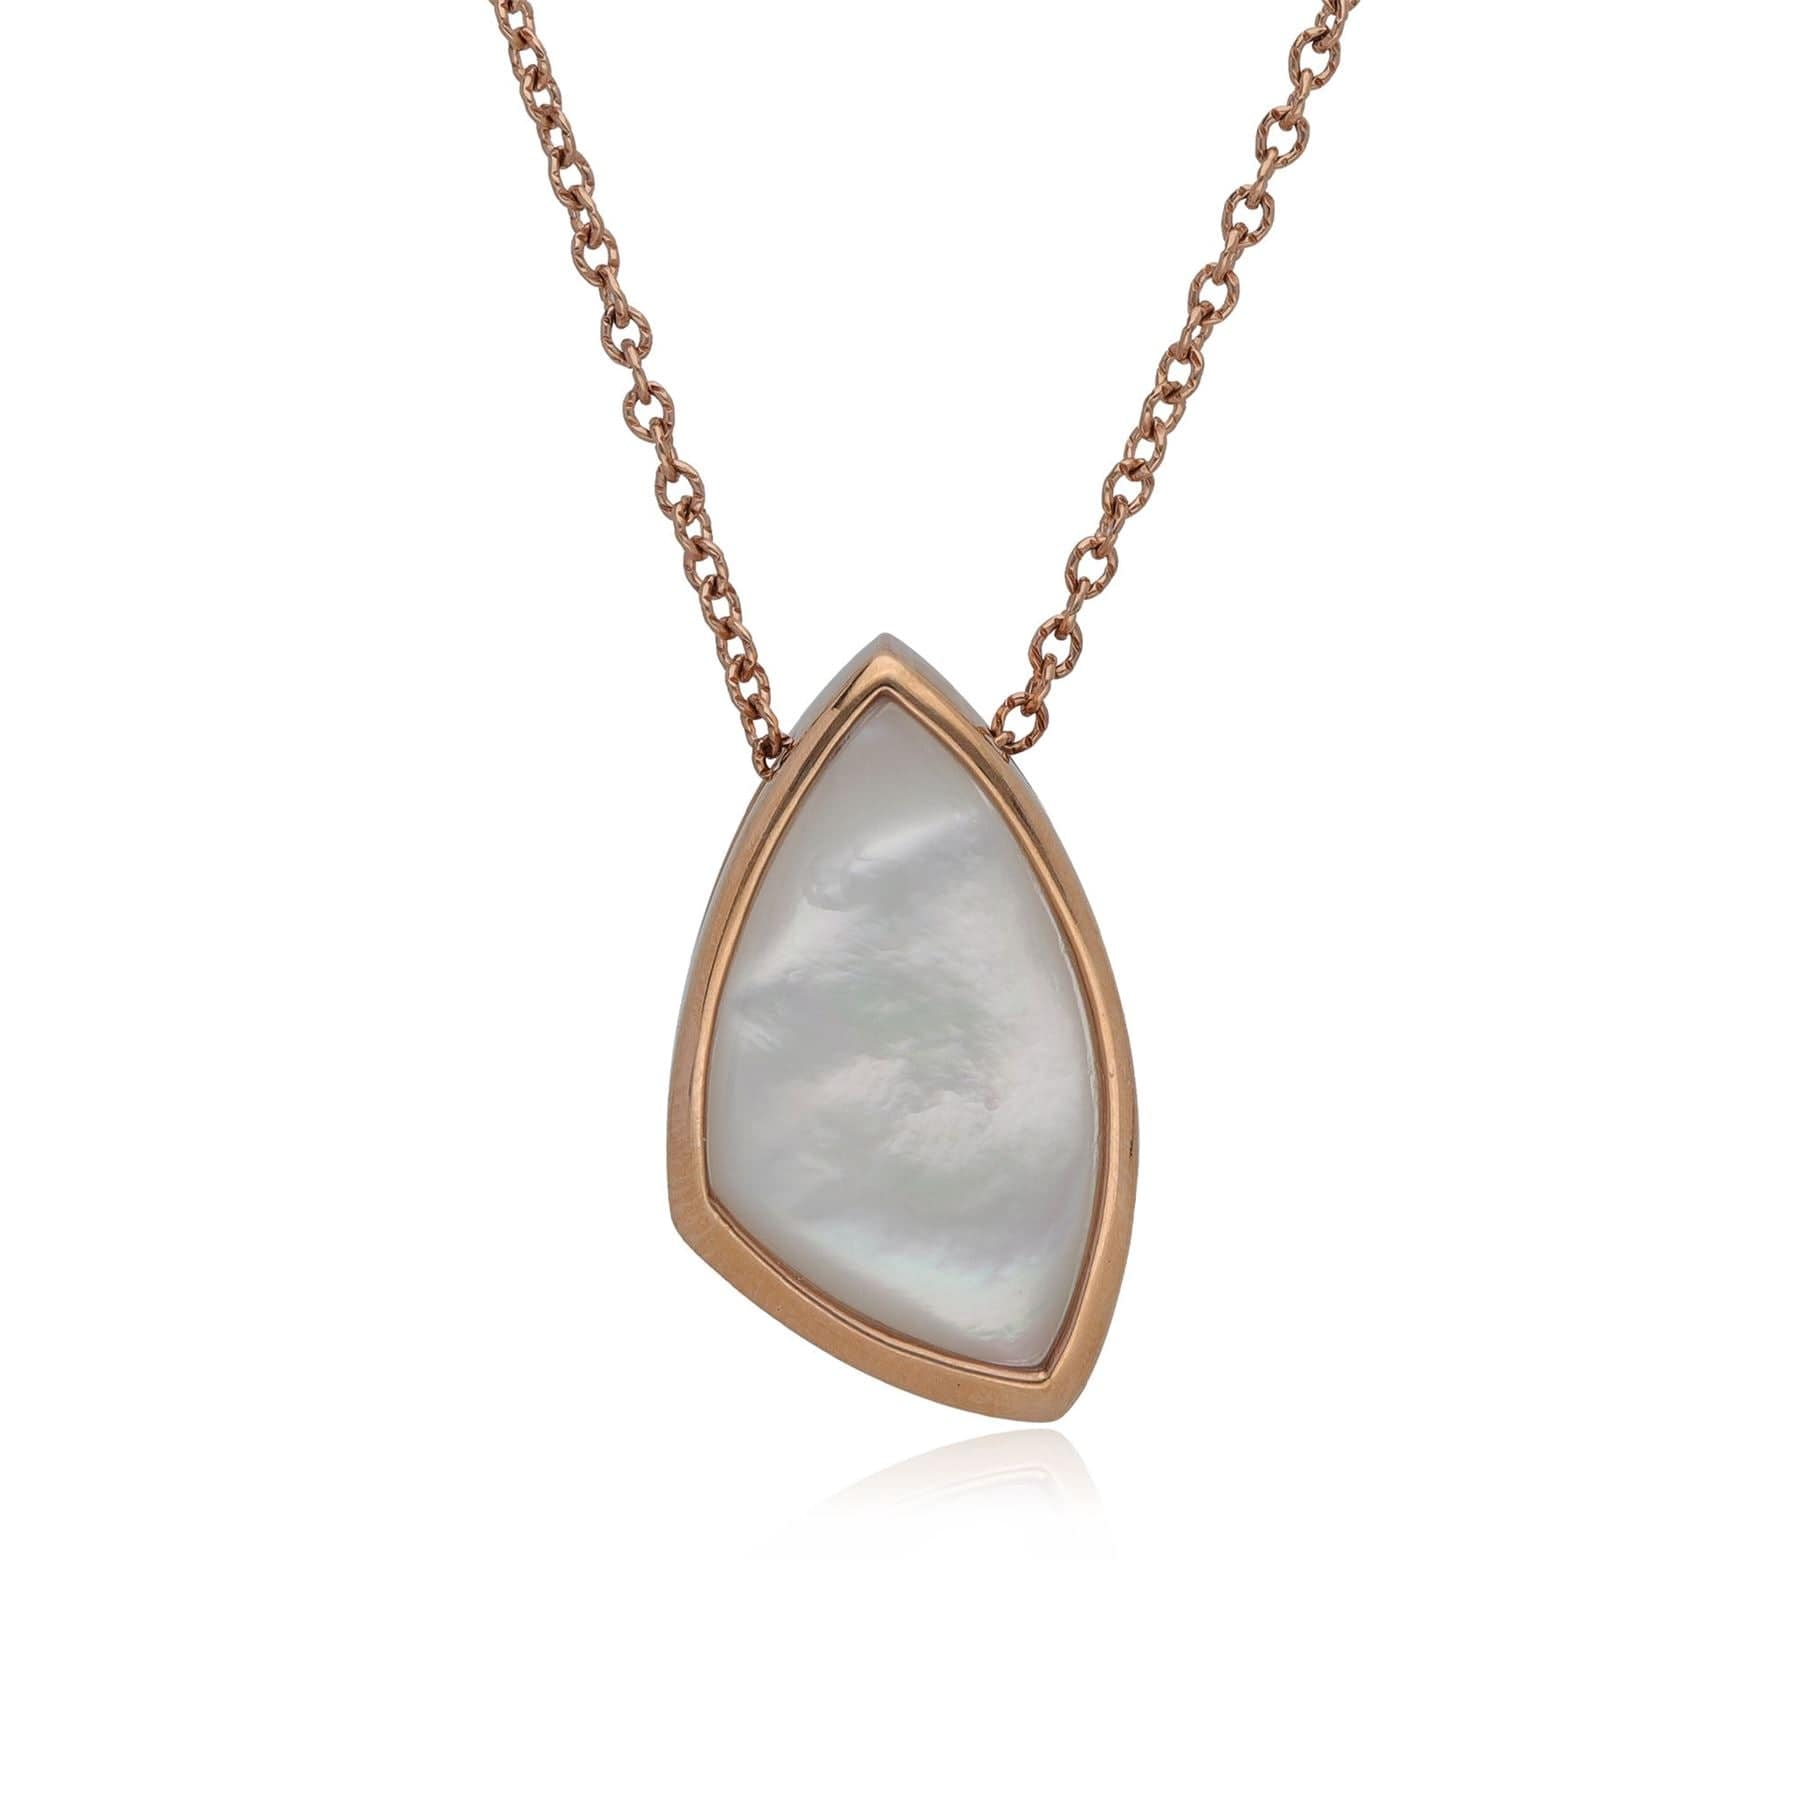 Kosmos Mother of Pearl Angular Necklace in Rose Gold Plated Sterling Silver - Gemondo